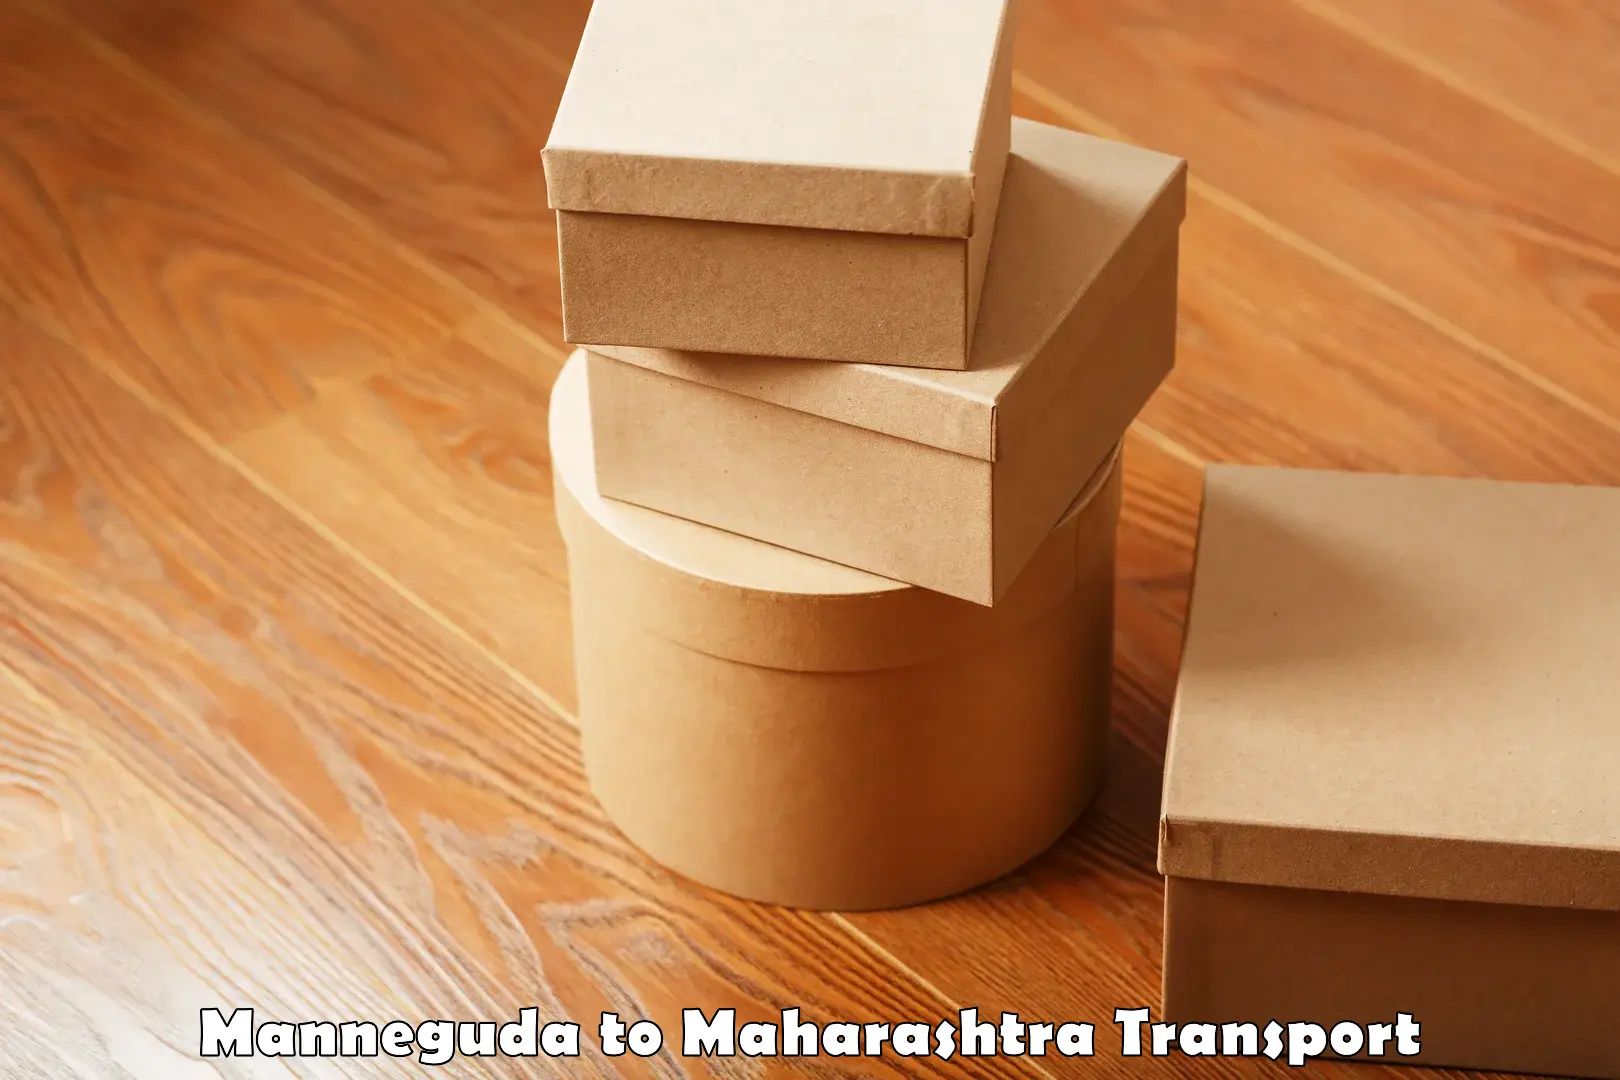 Container transport service Manneguda to Mahabaleshwar